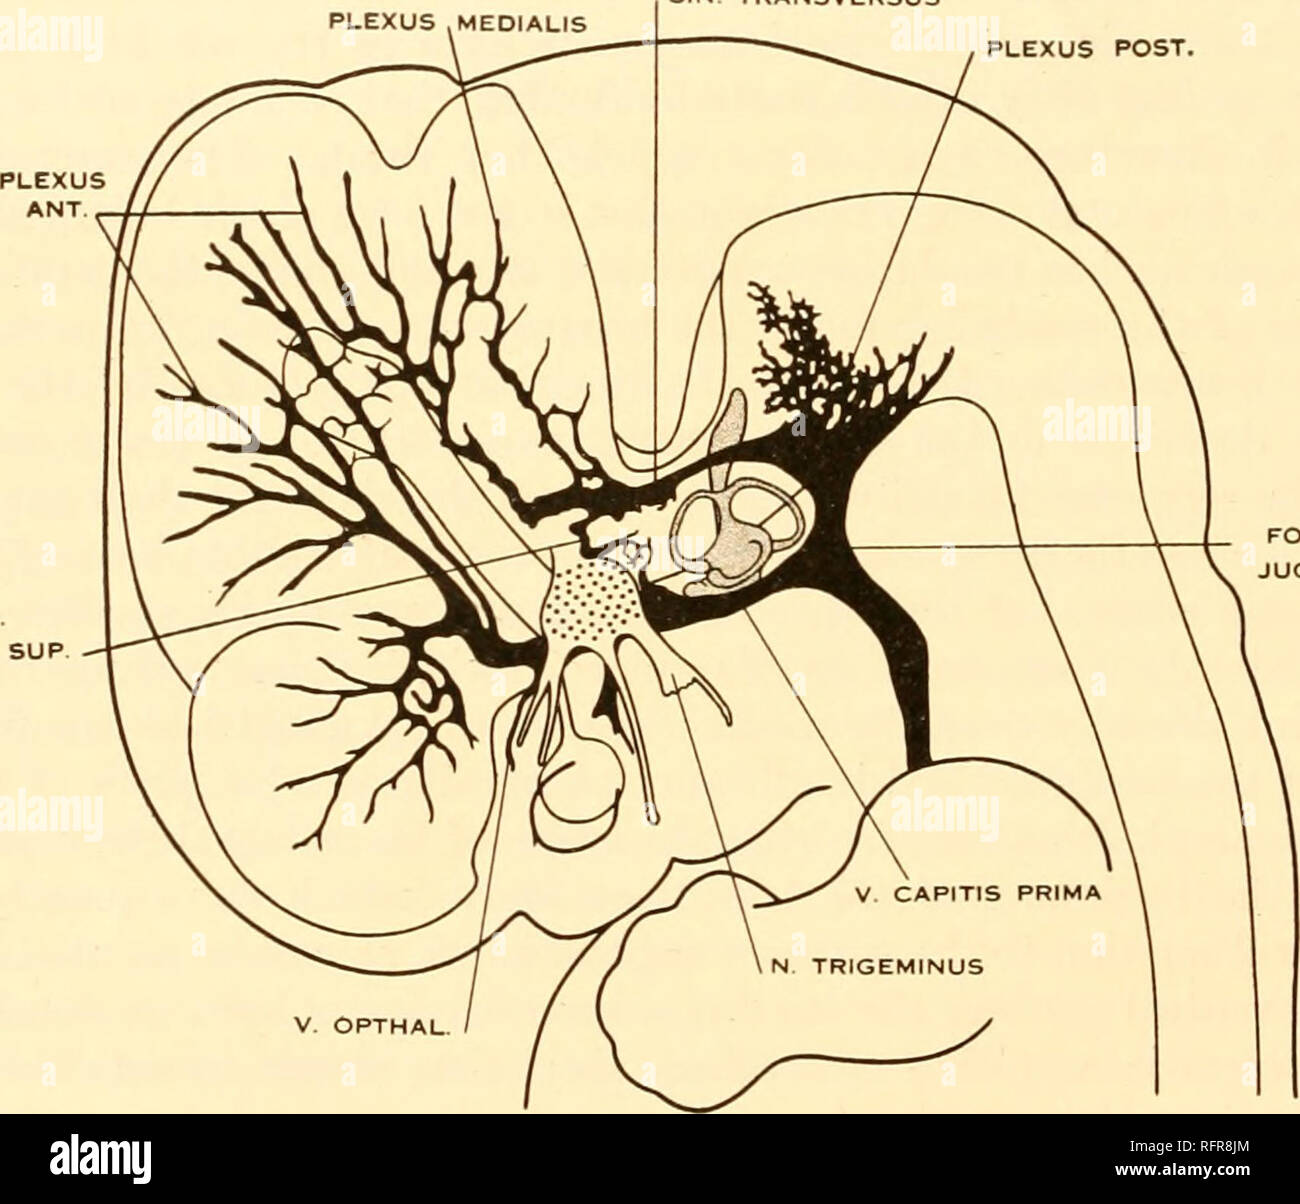 . Carnegie Institution of Washington publication. 20 THE DEVELOPMENTAL ALTERATIONS IN THE VASCULAR SYSTEM The main arterial trunks are well established at this stage and afford a more abundant supplj' of blood to the brain than existed in the 4 mm. embryo. Whereas the aortic system in the latter conformed to the branchial arches, it now presents a definite aortic arch derived from the truncus arteriosus and the fourth branchial arch of the left side. The innominate artery is formed by the fourth arch of the right side. The third arch has been taken up on each side in the formation of the commo Stock Photo